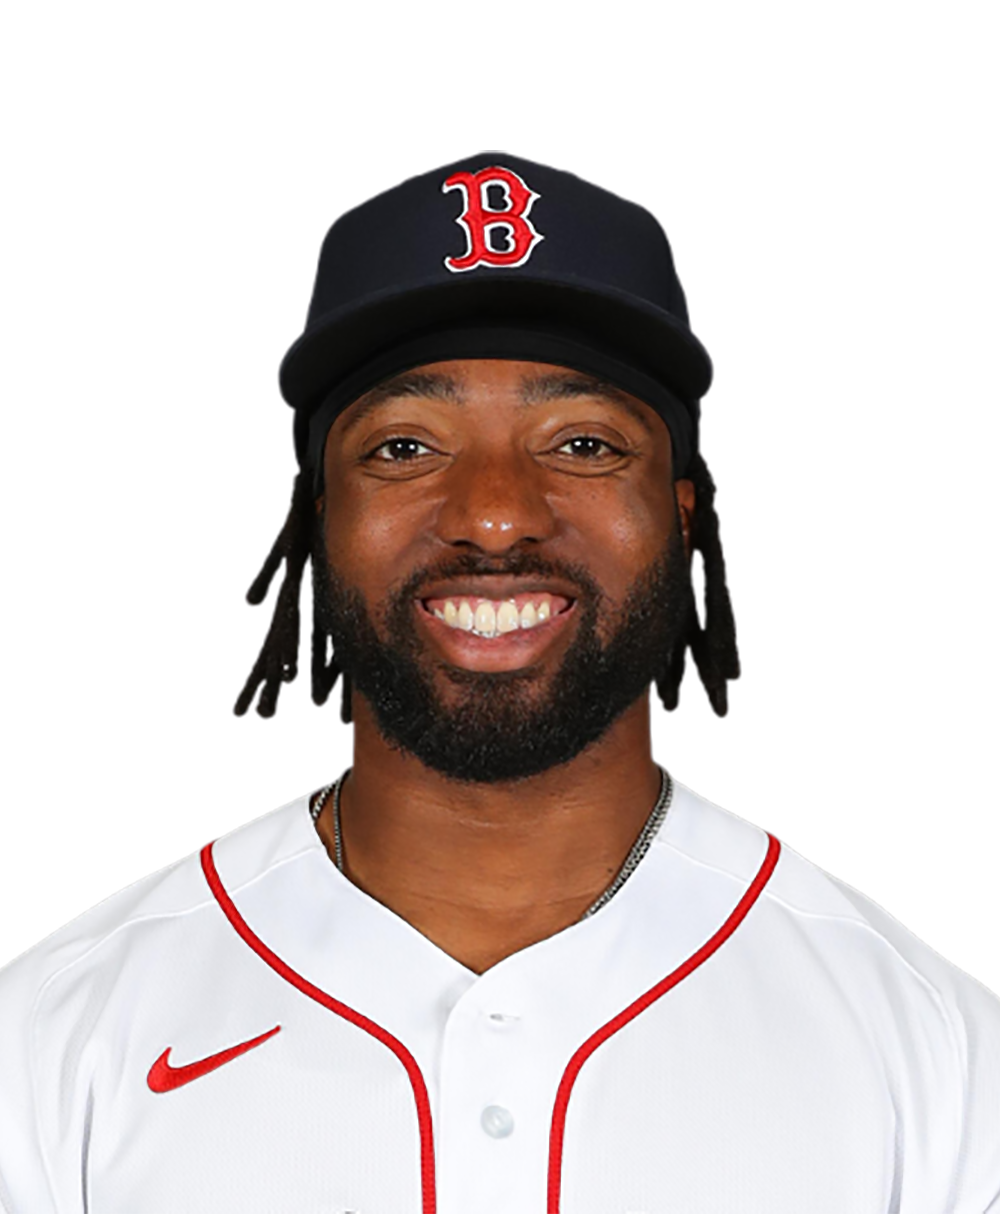 Akil Baddoo - MLB Left field - News, Stats, Bio and more - The Athletic